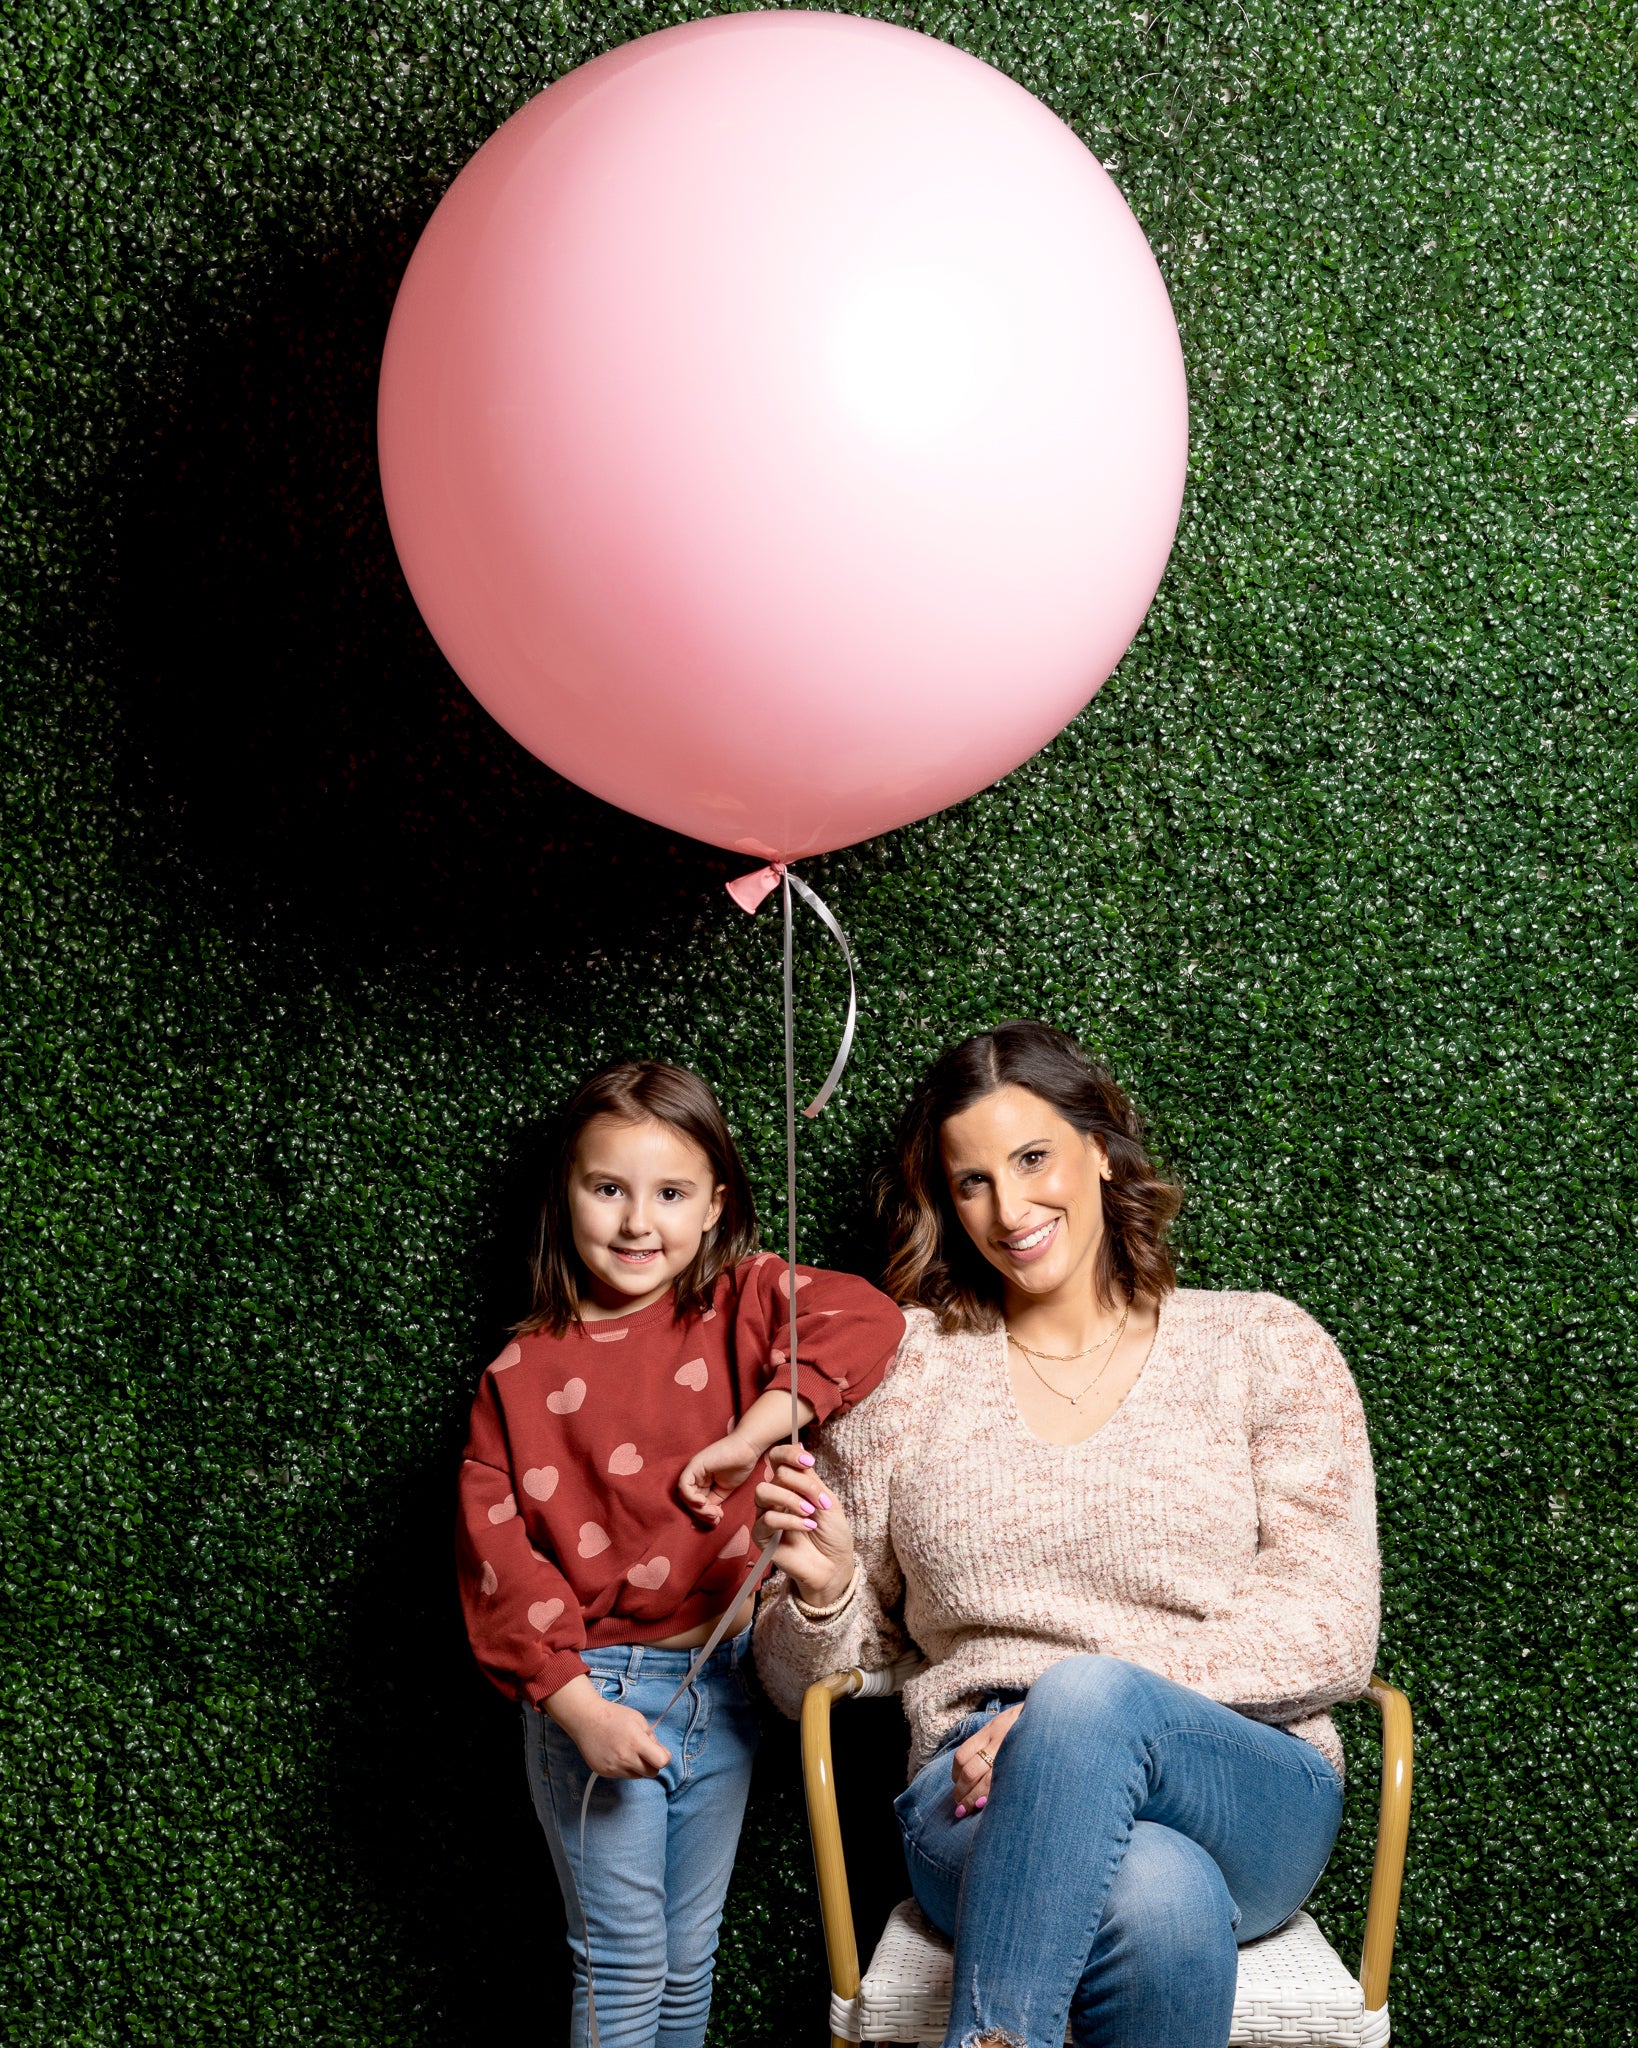 Nina and her daughter in front of the greenery wall at Waterlemon Kids holding a pink balloon